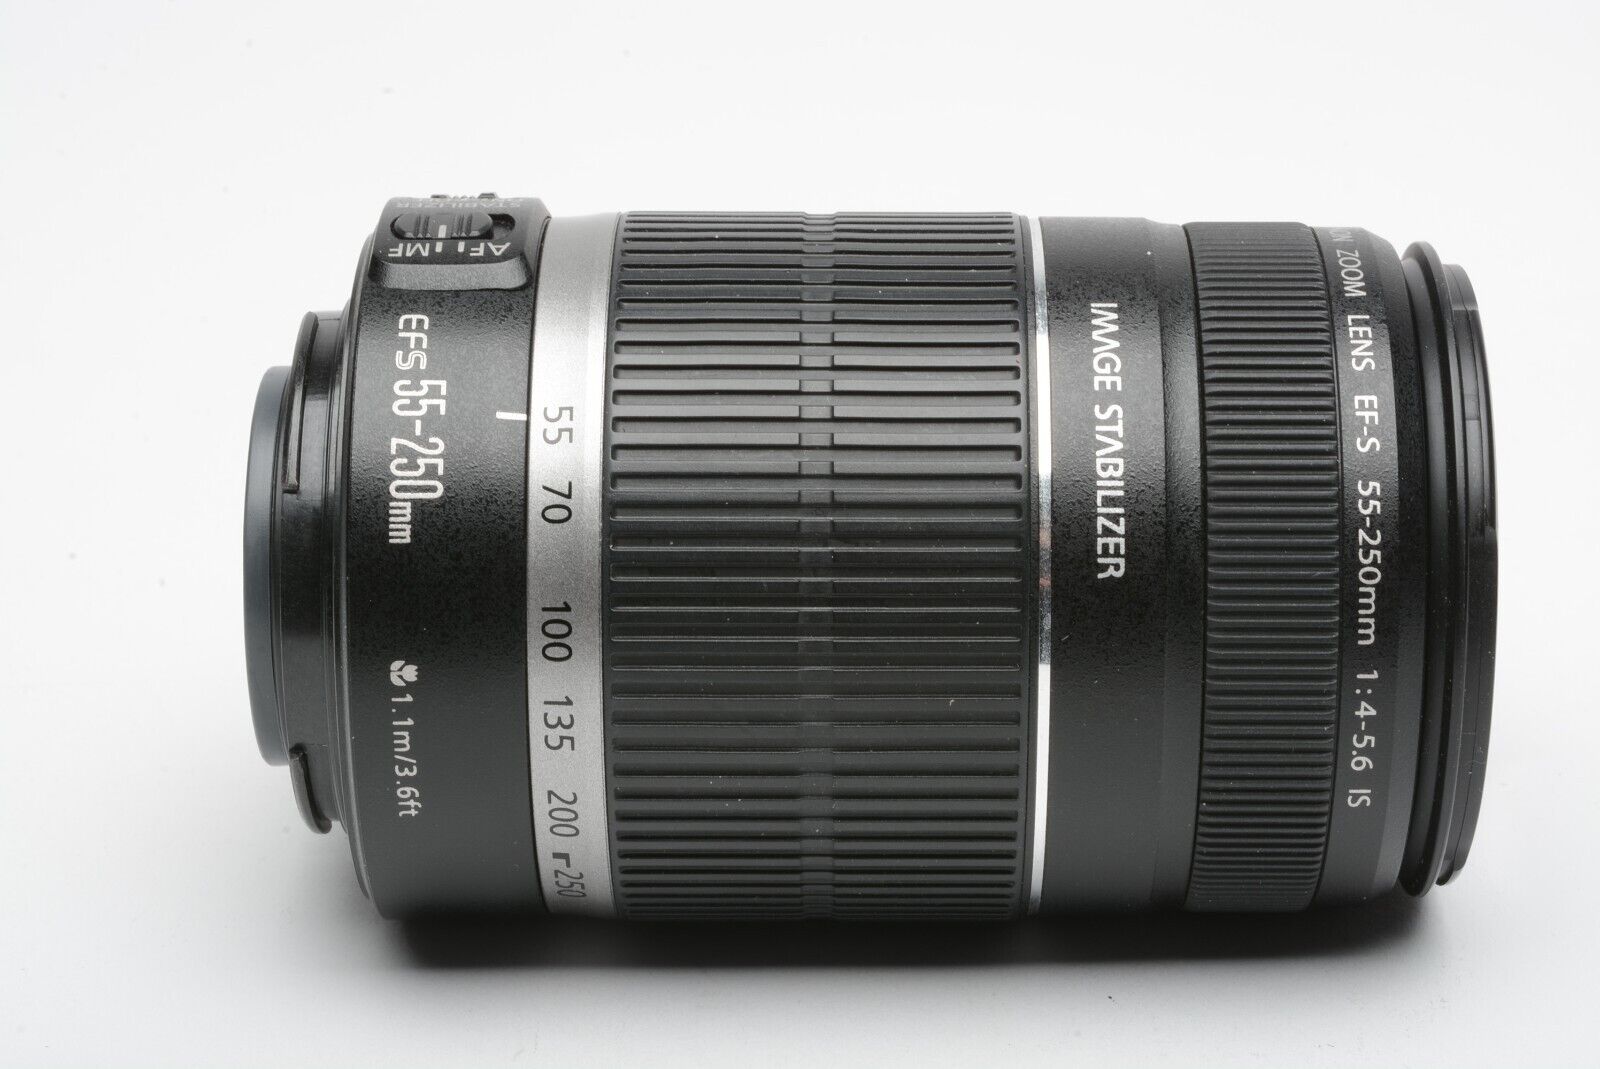 Canon EF-S 55-250mm f4-5.6 IS II zoom lens, caps, very clean